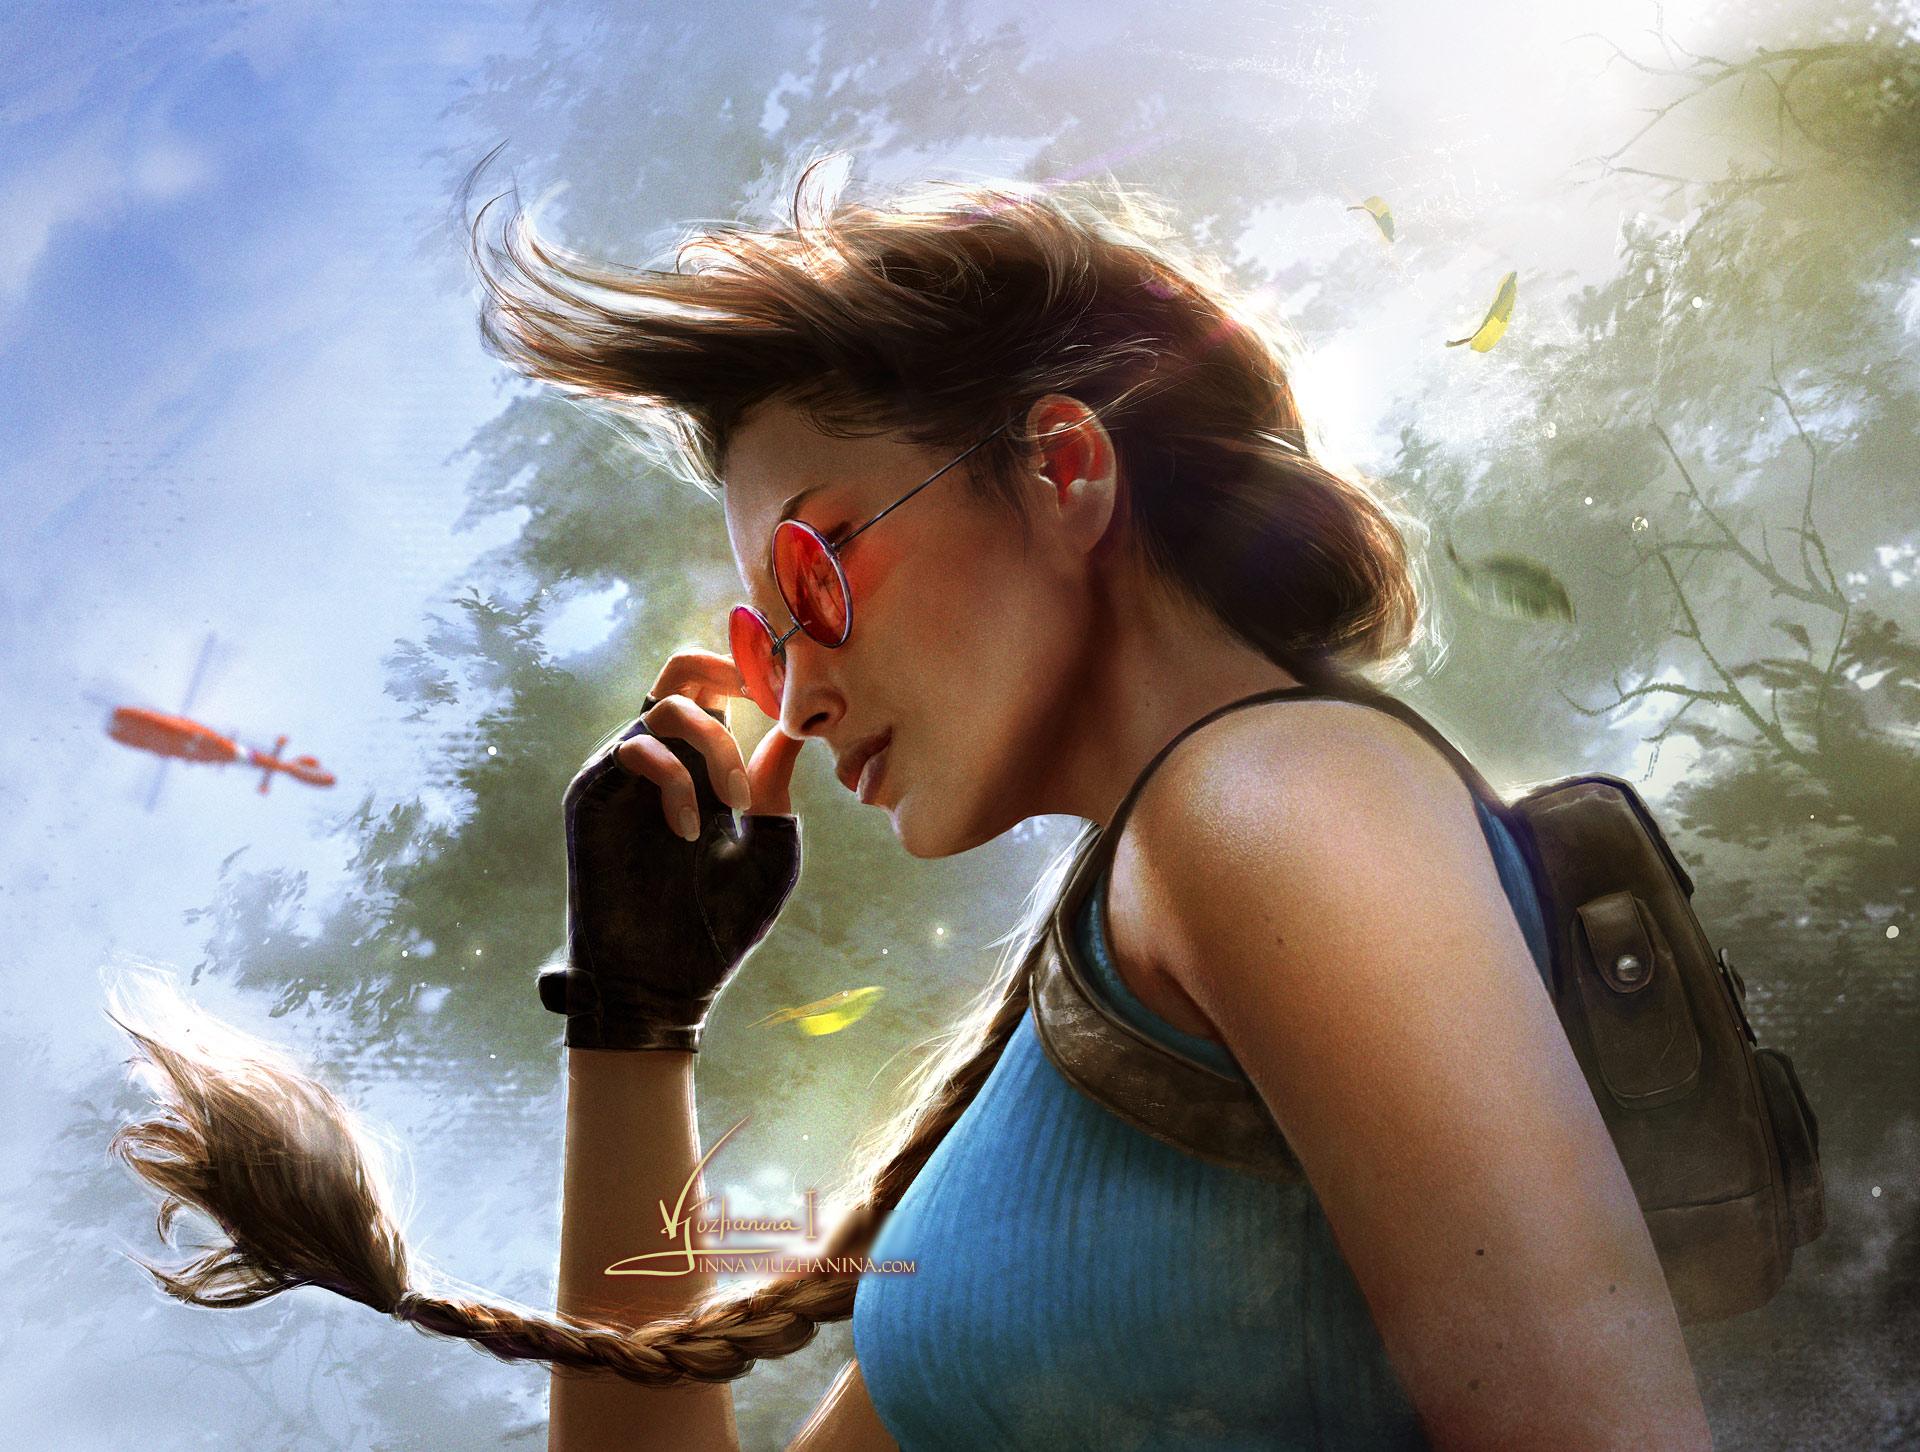 Lara Croft adjusting her red sunglasses while her braid sways on the wind.